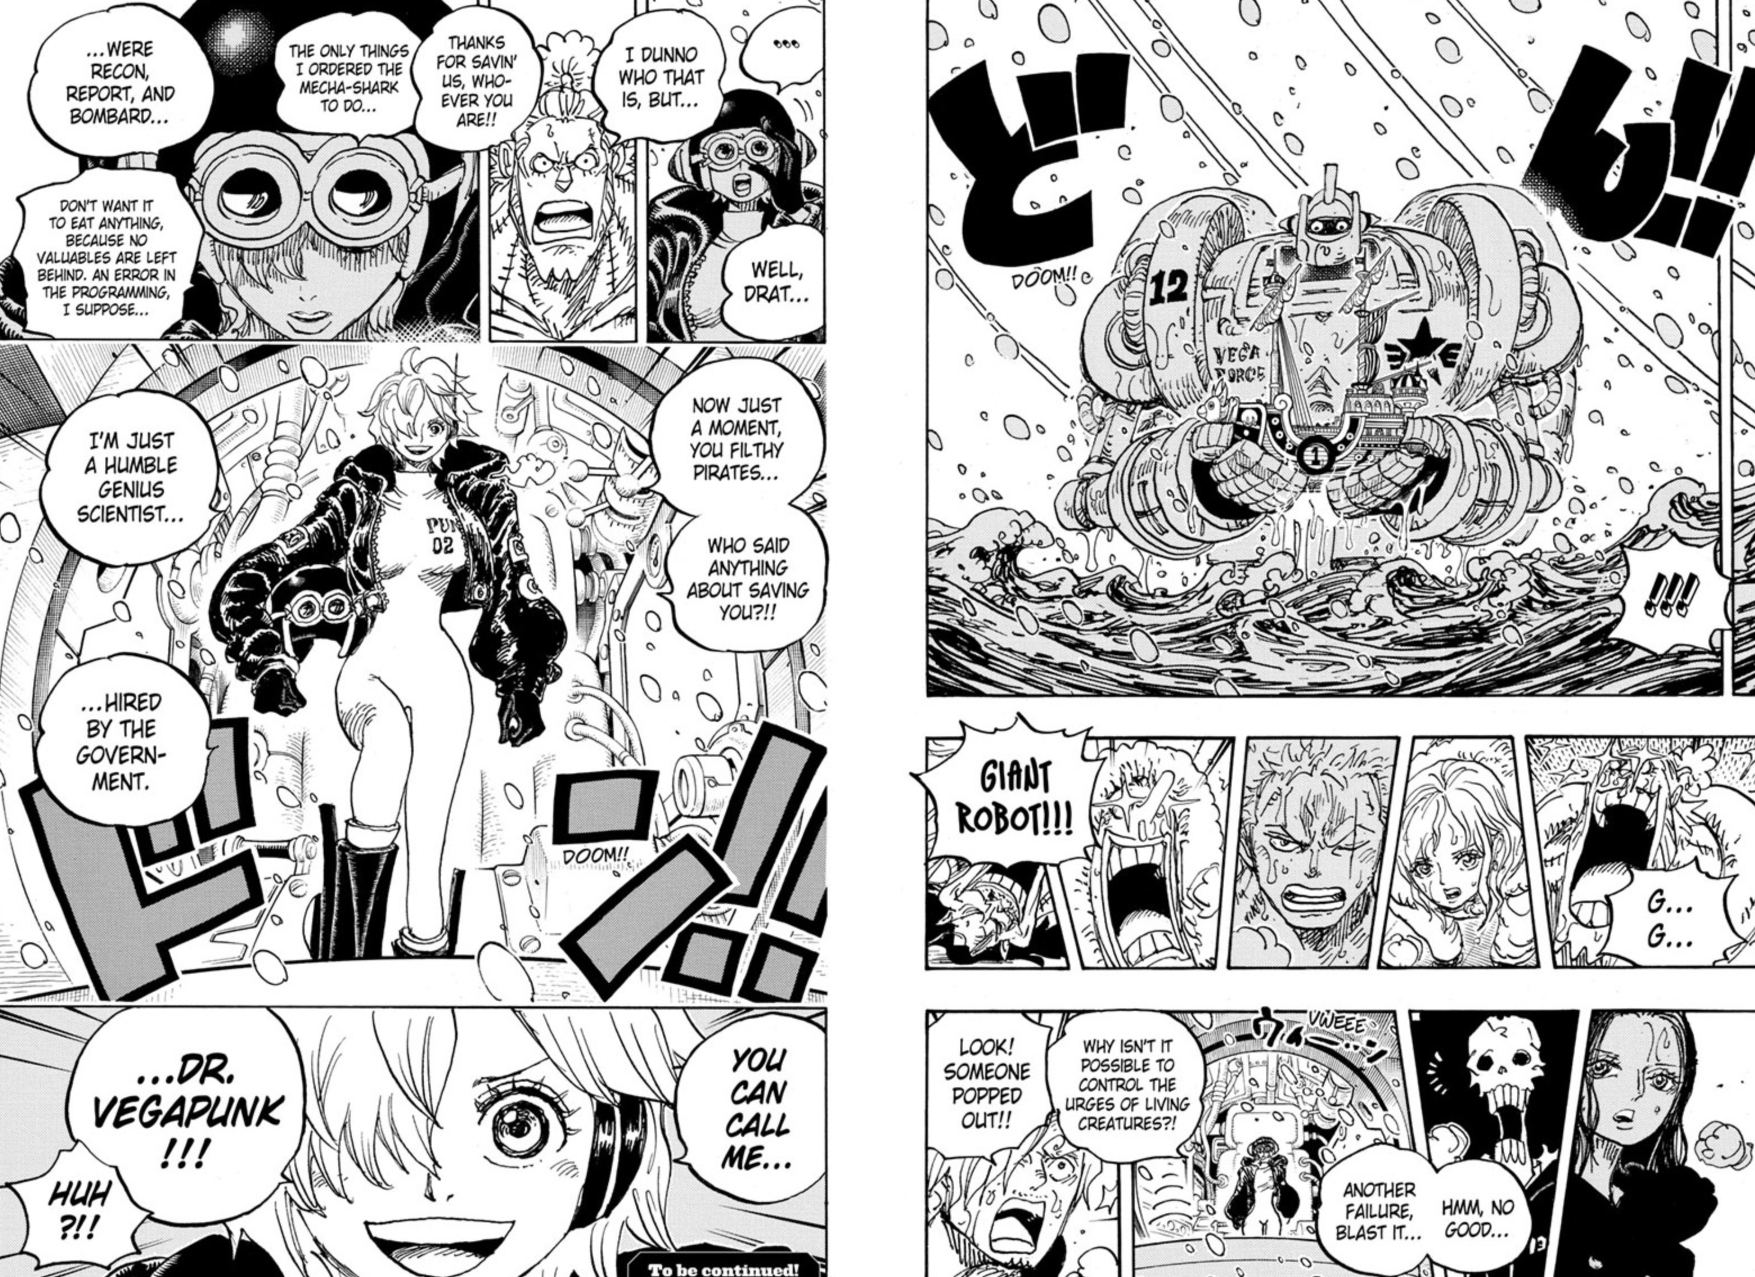 One piece Chapter 1061 pages 14-15